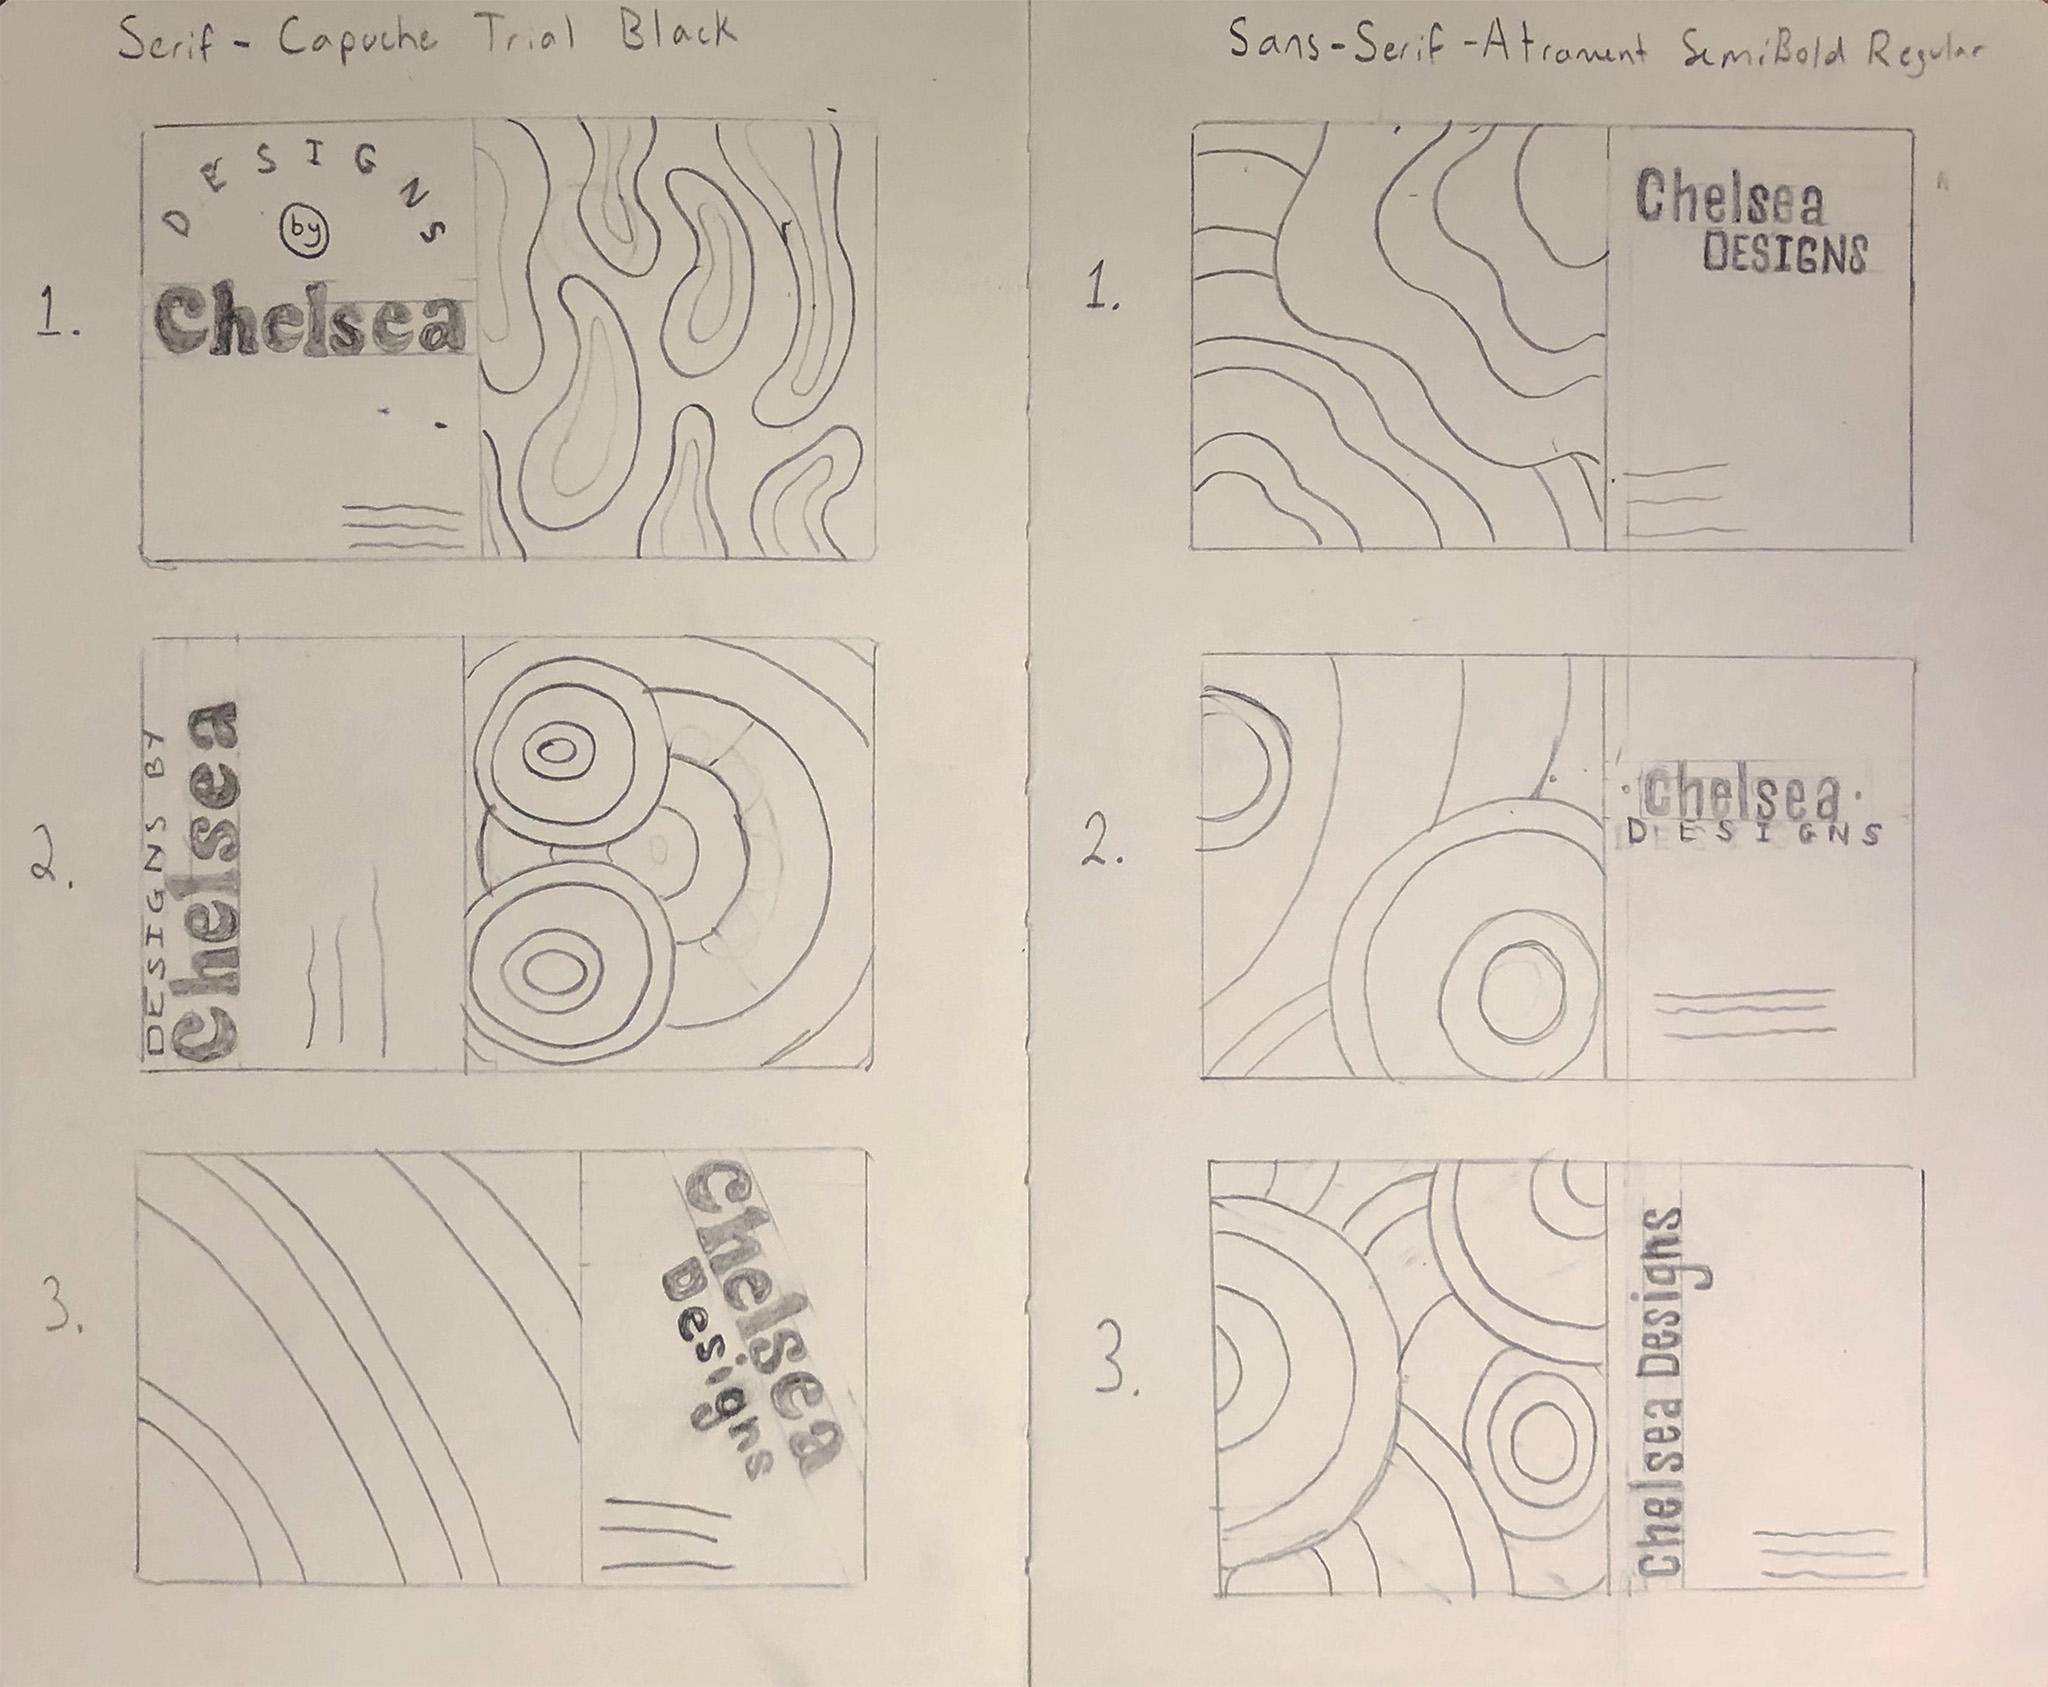 Image of 6 sketches of different business card designs for Chelsea Designs featuring organic lines and circles.